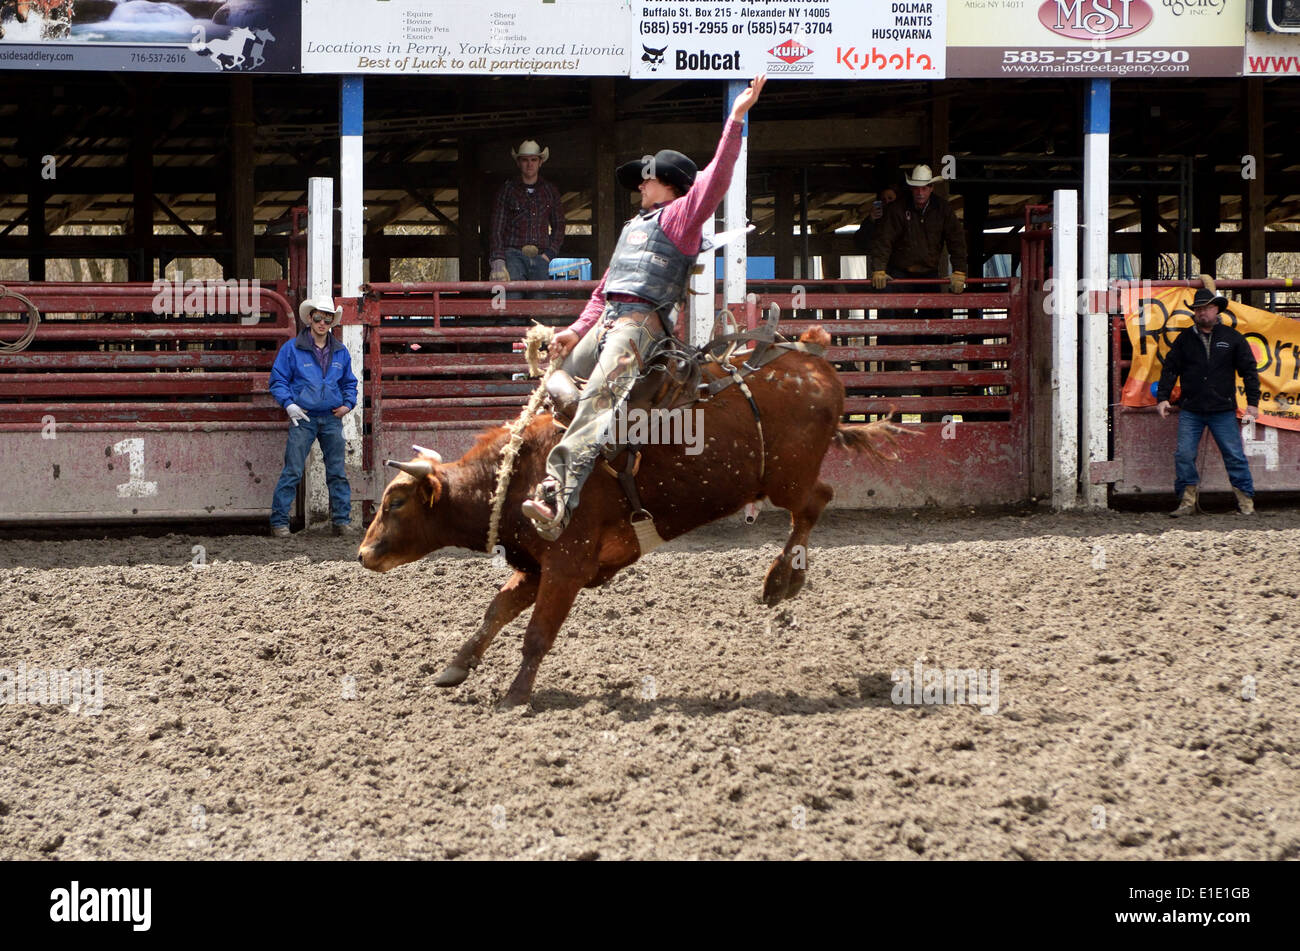 Rider is thrown from bucking horse at Rodeo. Stock Photo